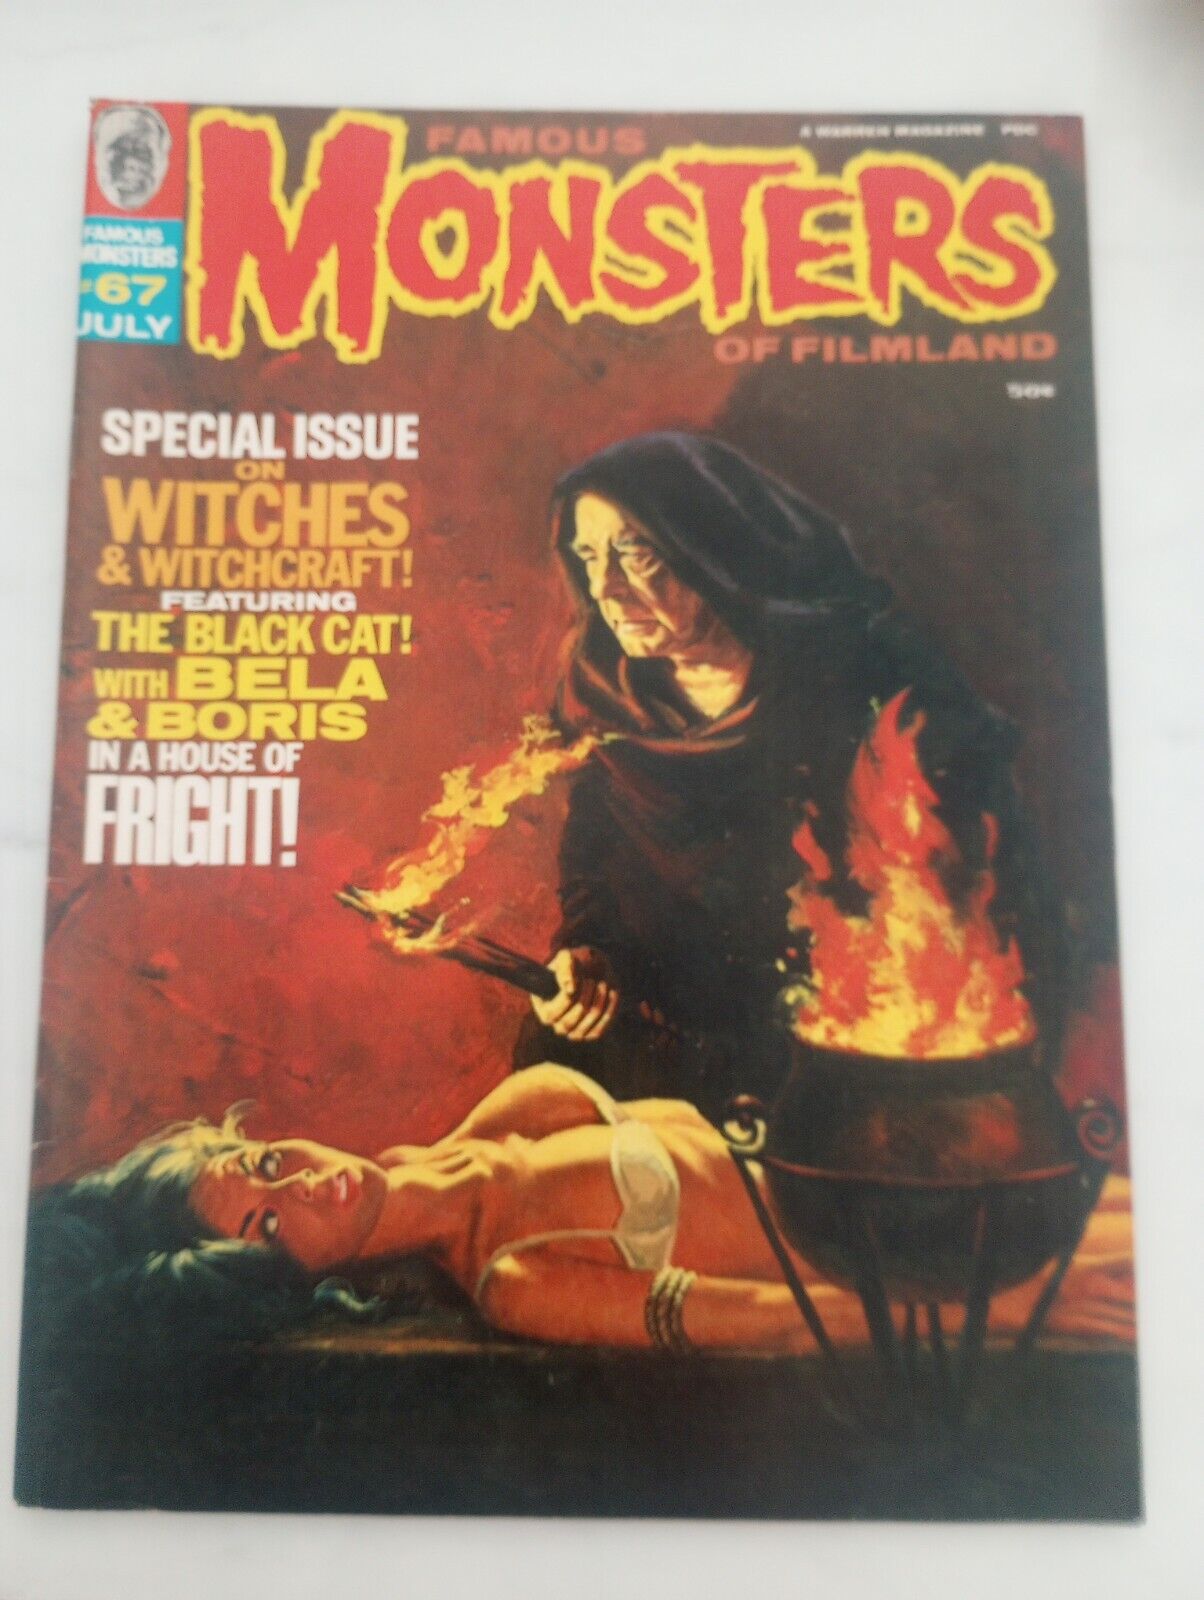 Vintage 1970 Famous Monsters of Filmland #67 Horror Magazine Witches Witchcraft